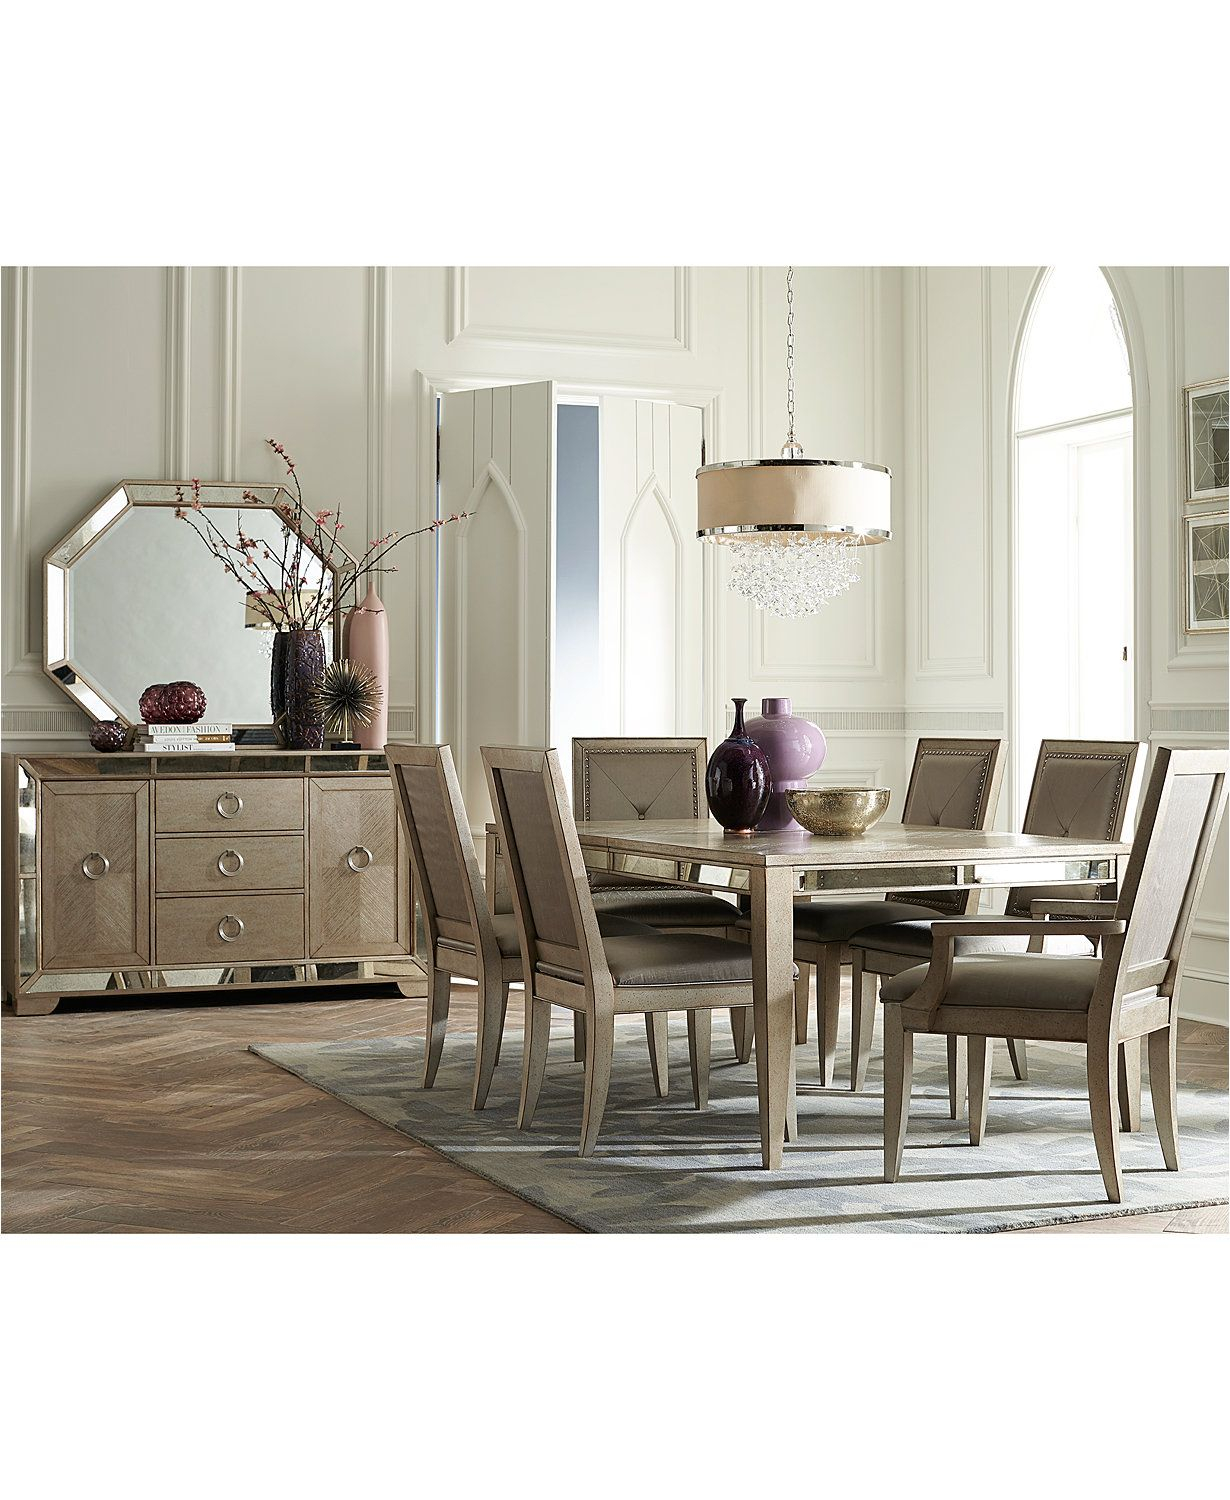 Ailey Dining Room Furniture Collection Only At Macys throughout sizing 1230 X 1500